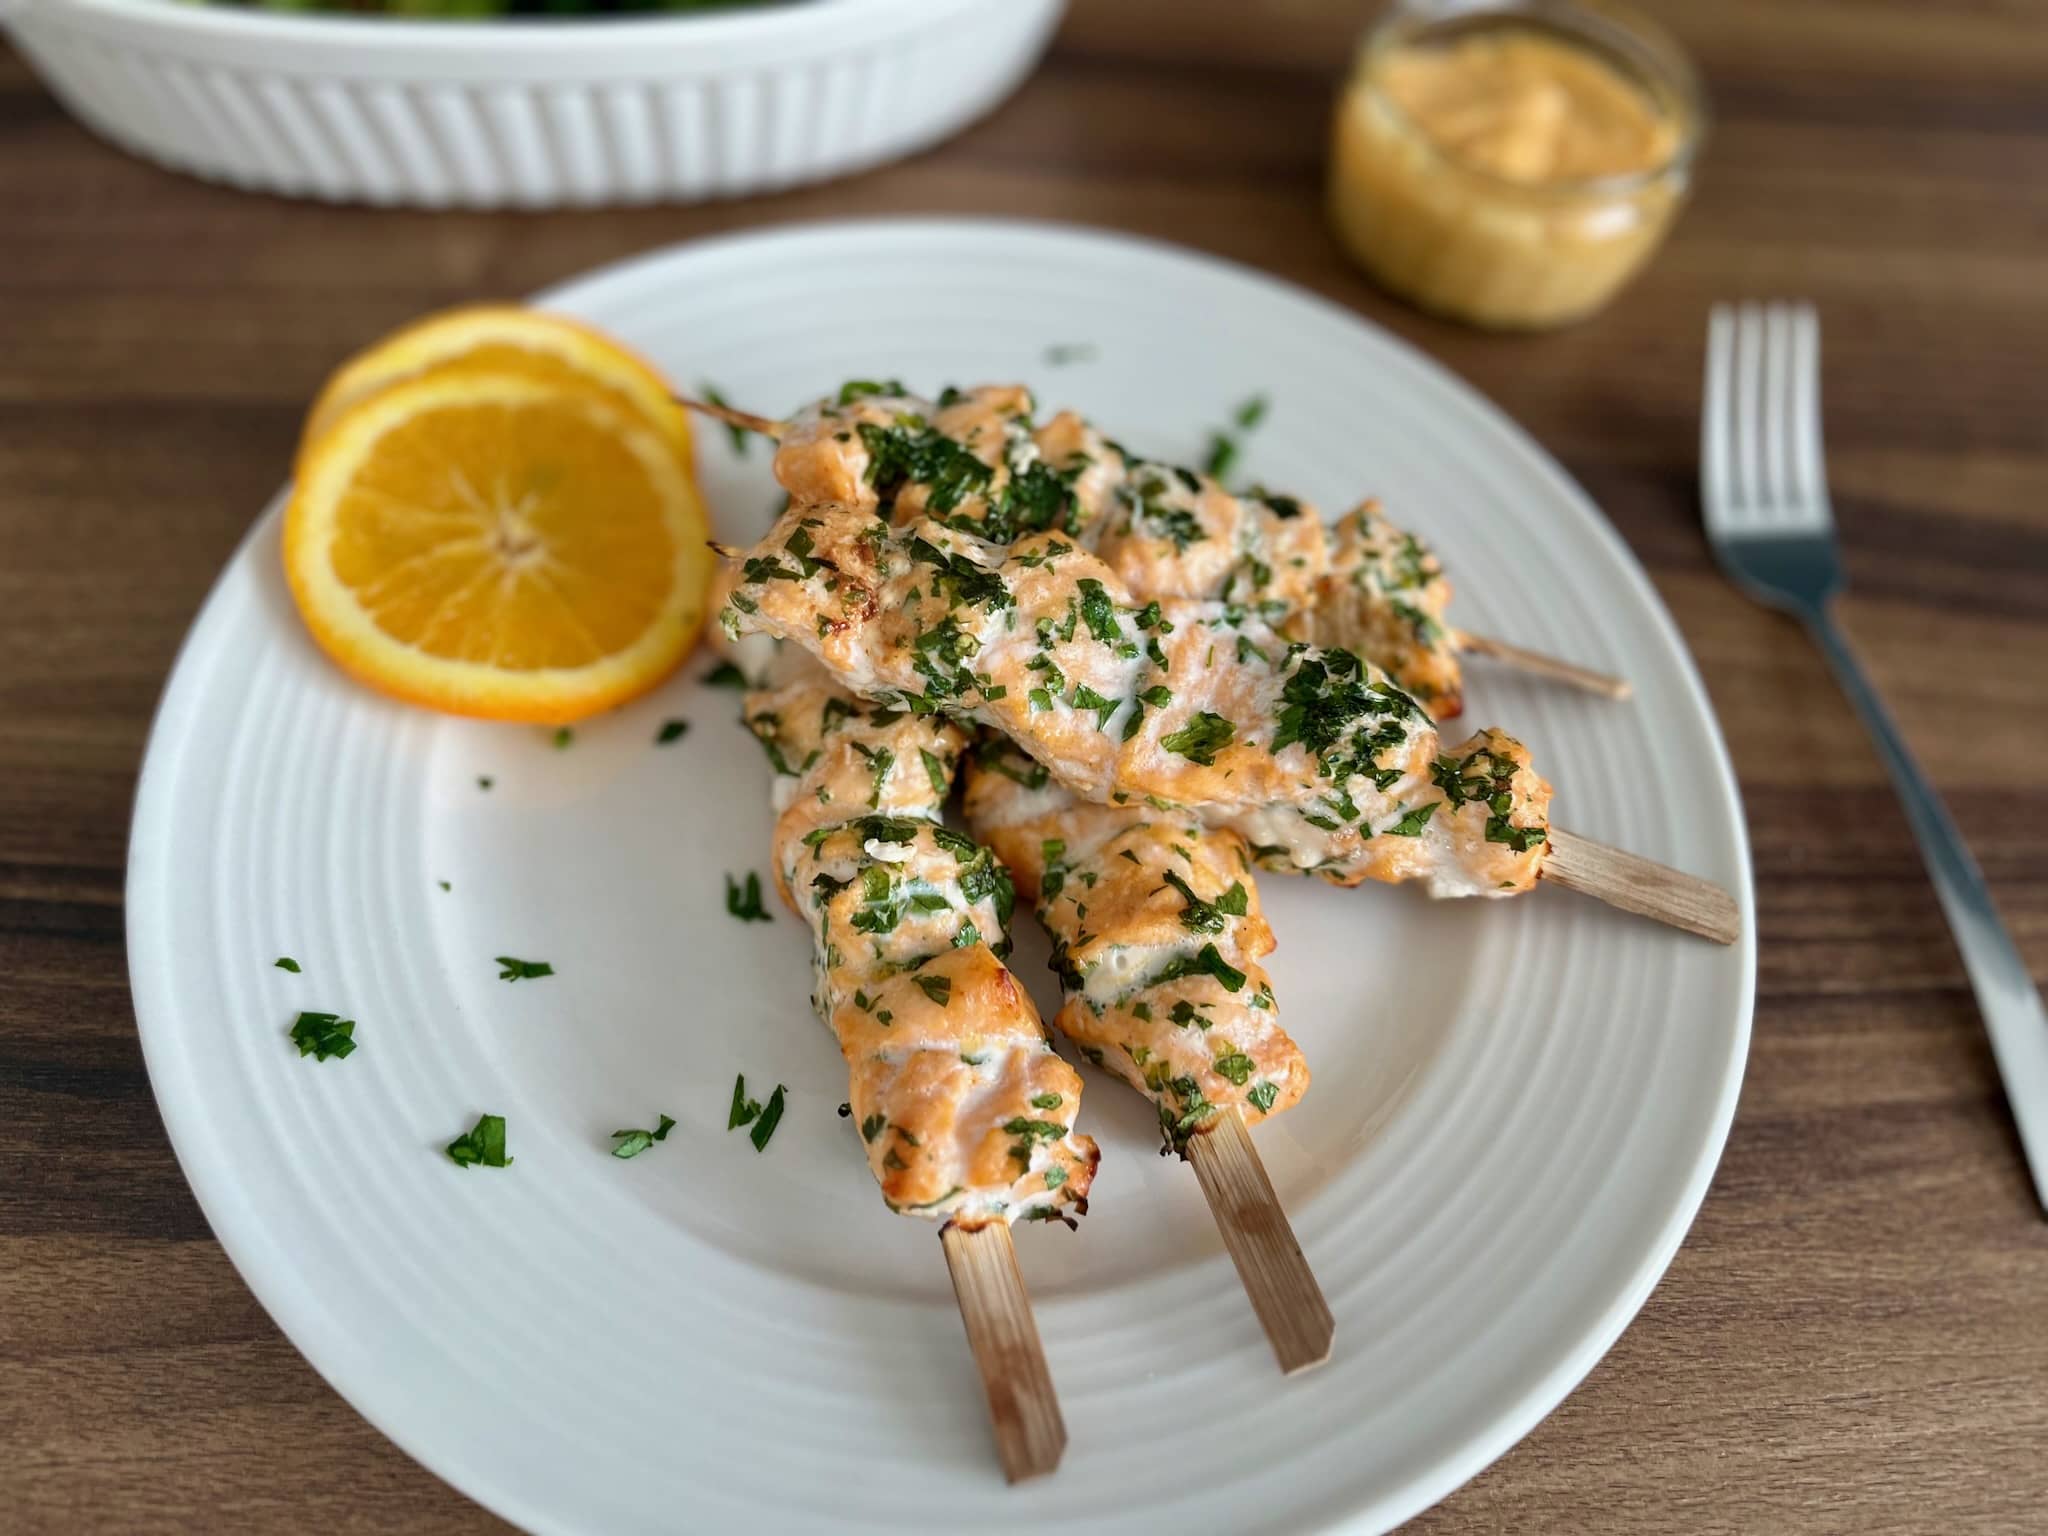 Nicely baked salmon skewers on a plate with orange slices on a side